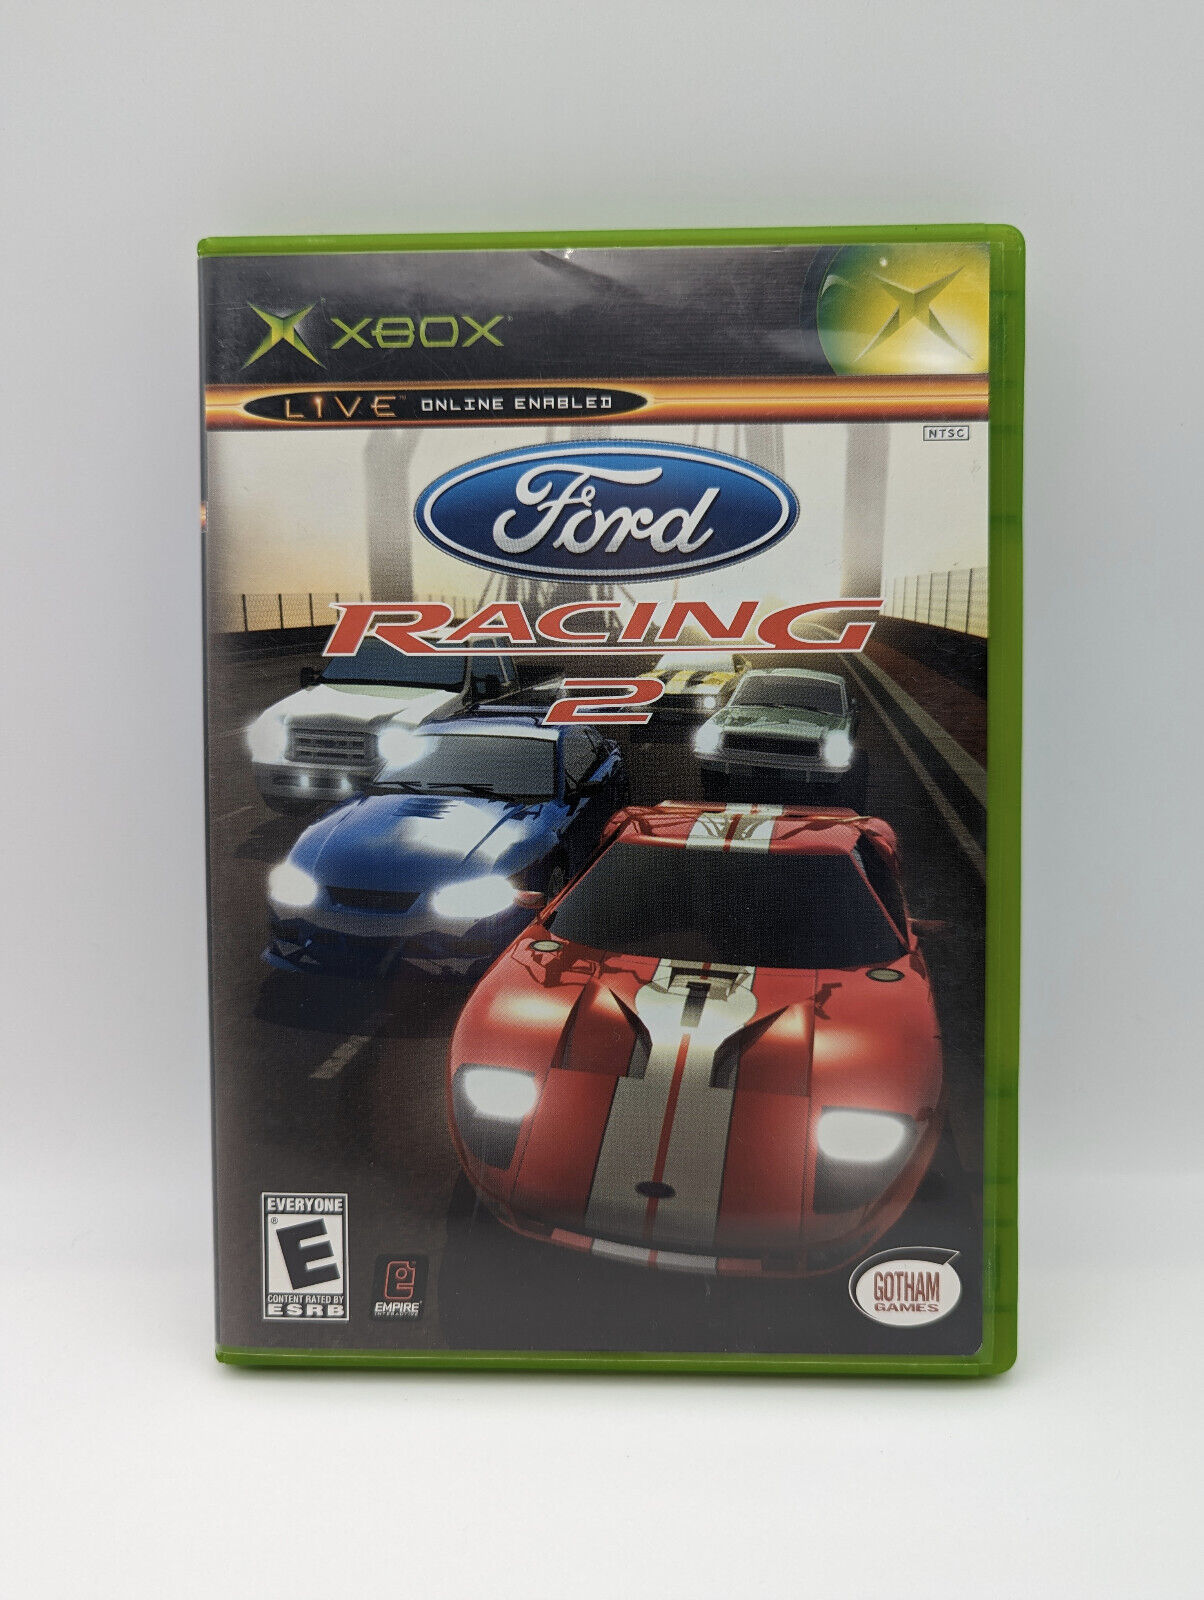 Ford Racing 2 (Xbox, 2003) NO SCRATCHES, VERY GOOD COMPLETE, MAIL IT TOMORROW!